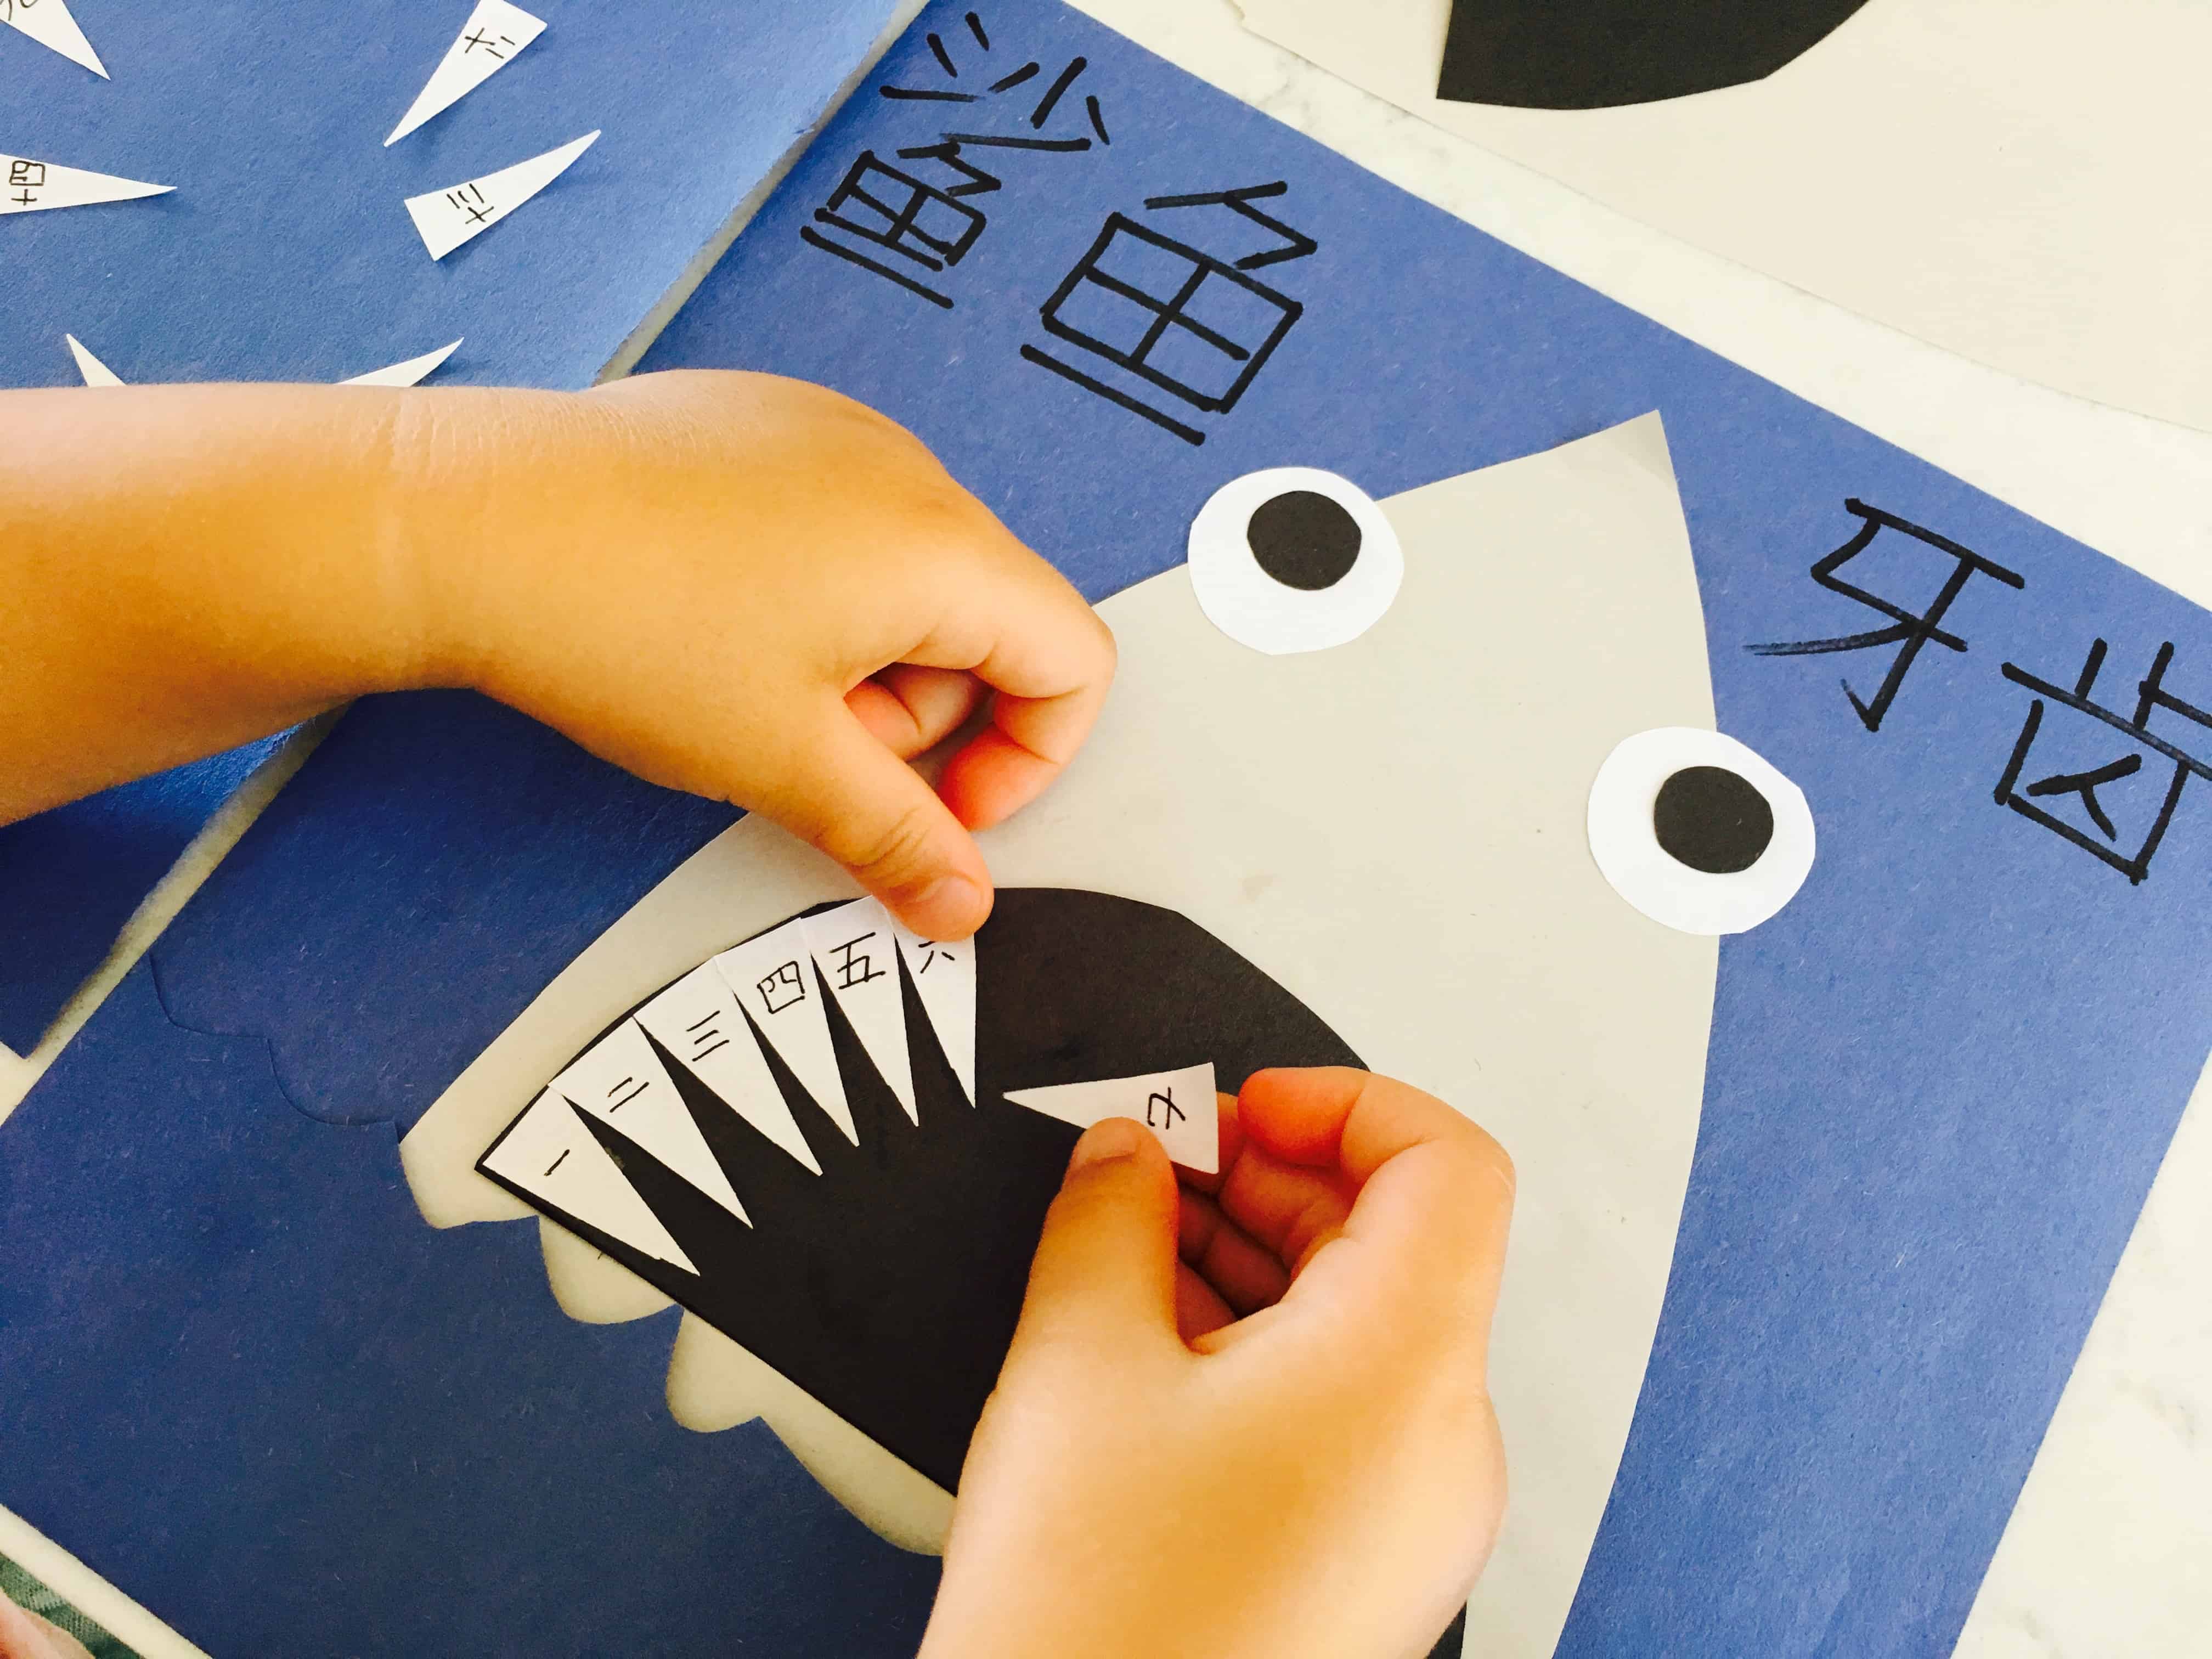 Preschool shark teeth craft - learning how to count in Chinese